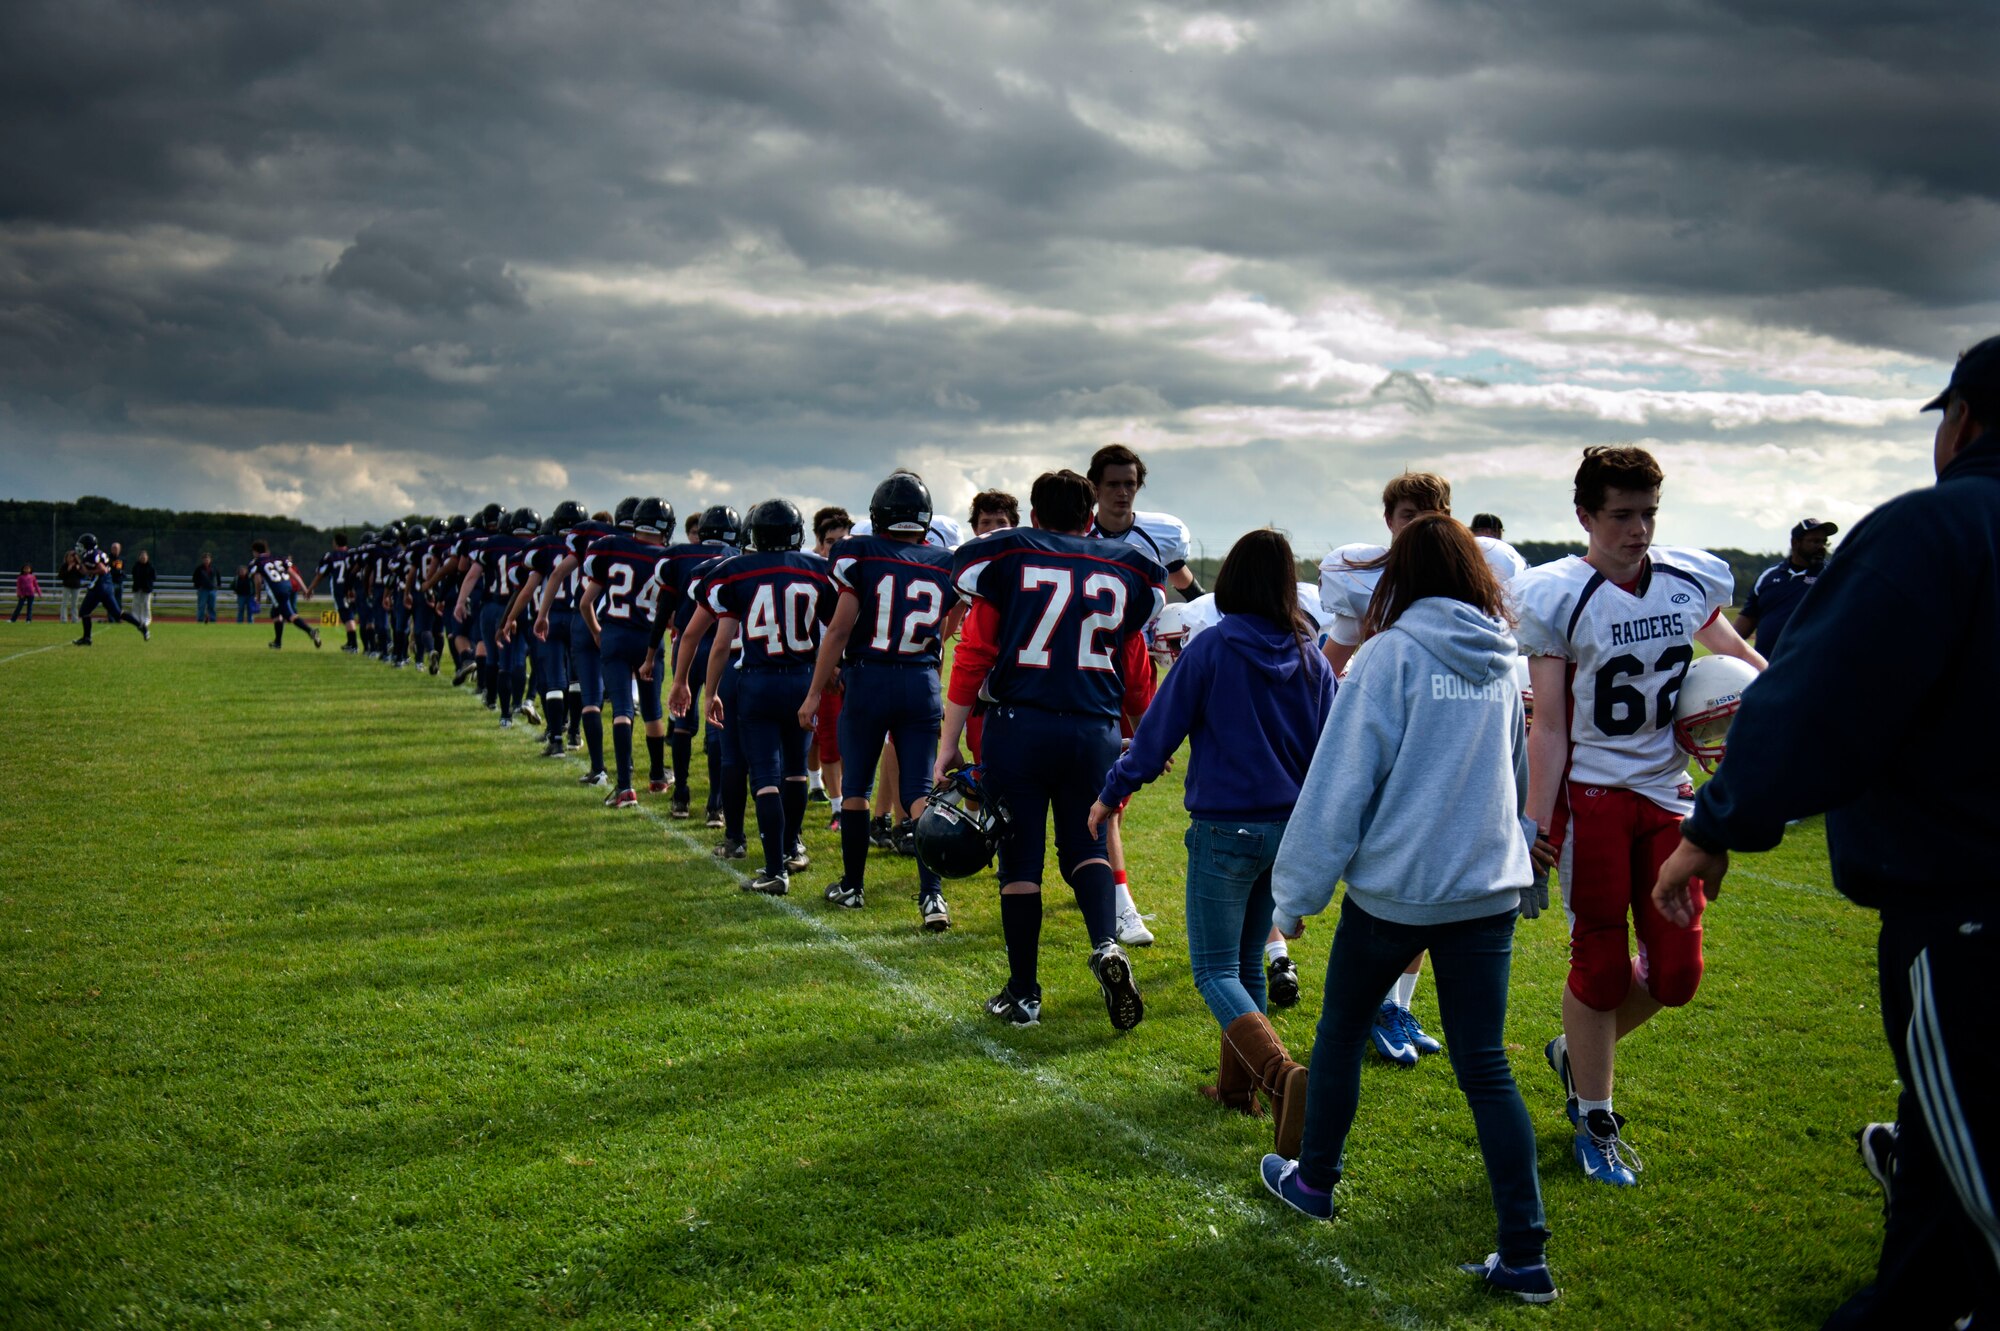 BITBURG ANNEX, Germany –Barons players shake hands with their opponents after their homecoming game against the Raiders at Bitburg High School Sept. 29.  The Barons have won the last three Department of Defense European Division II championships and are undefeated this year. (U.S. Air Force photo by Airman 1st Class Gustavo Castillo/Released)